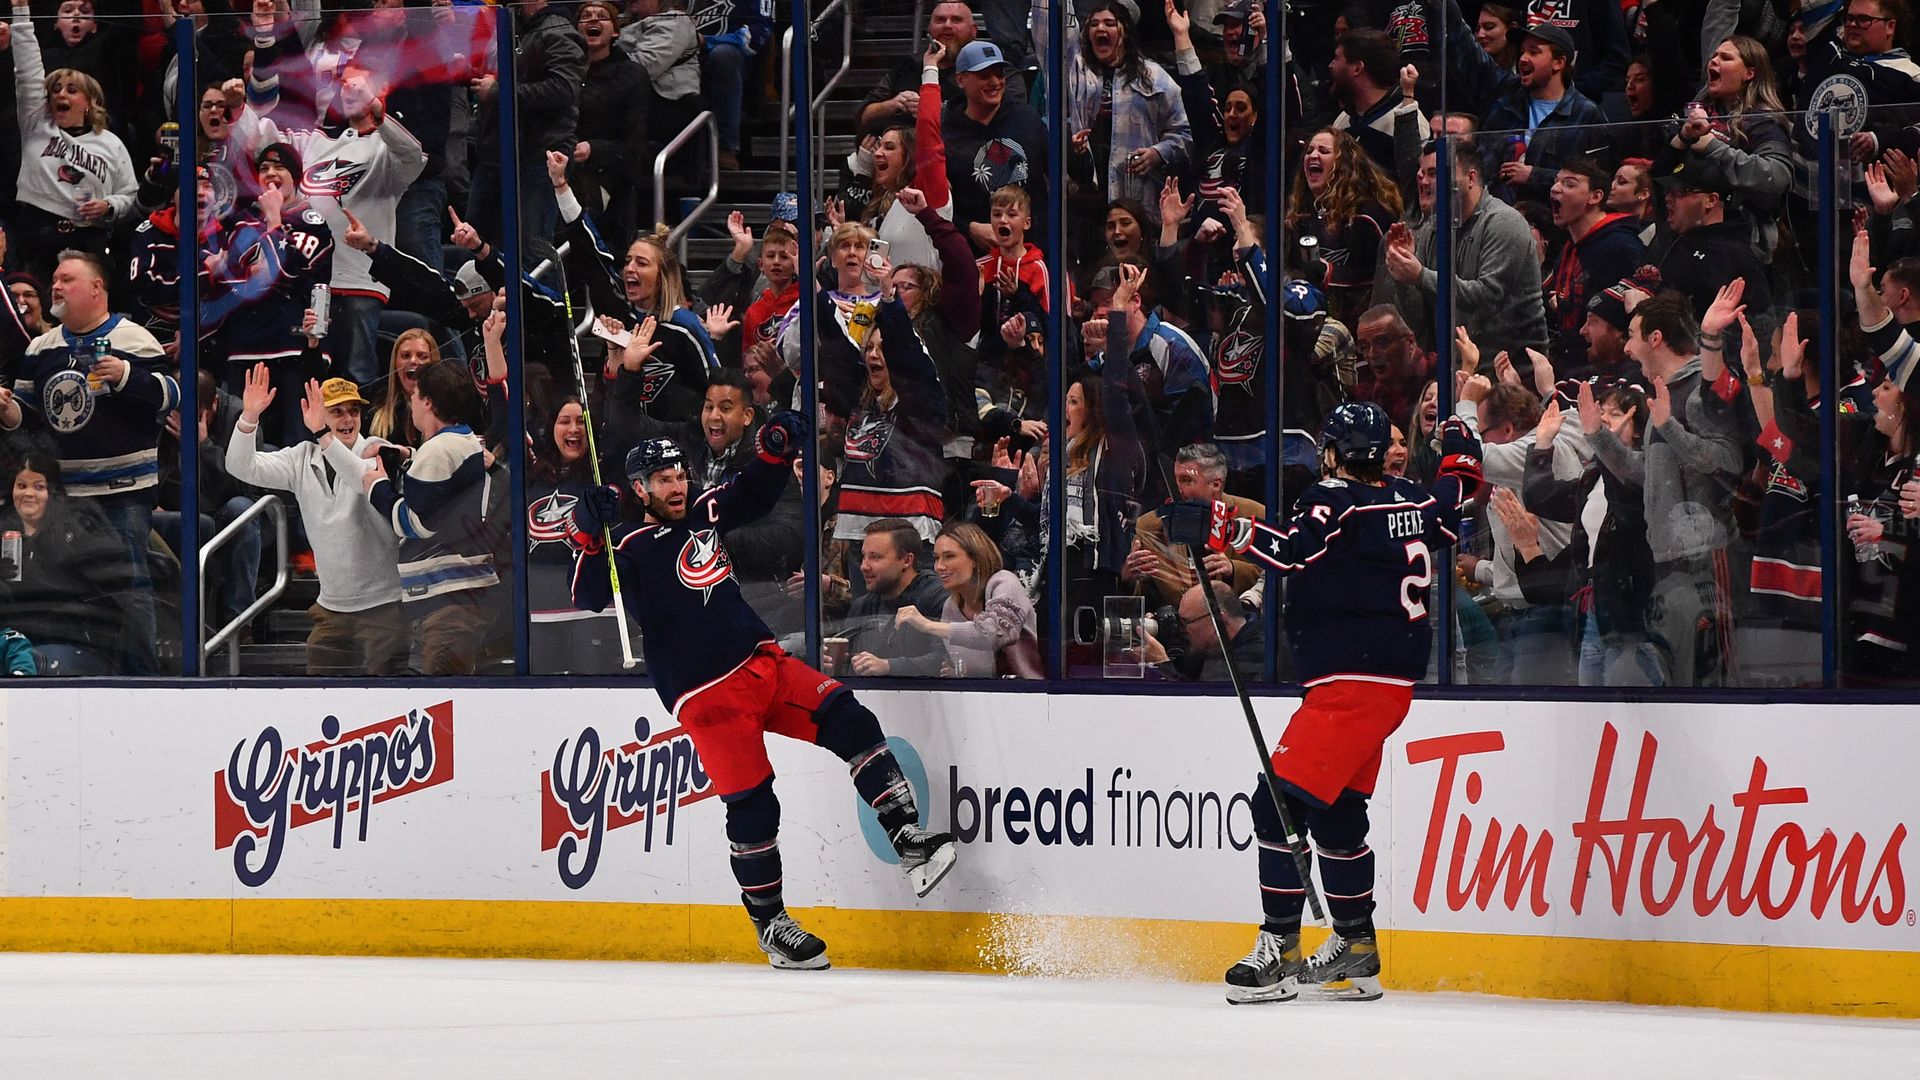 Boone Jenner celebrates with teammate Andrew Peeke after scoring a goal while fans cheer